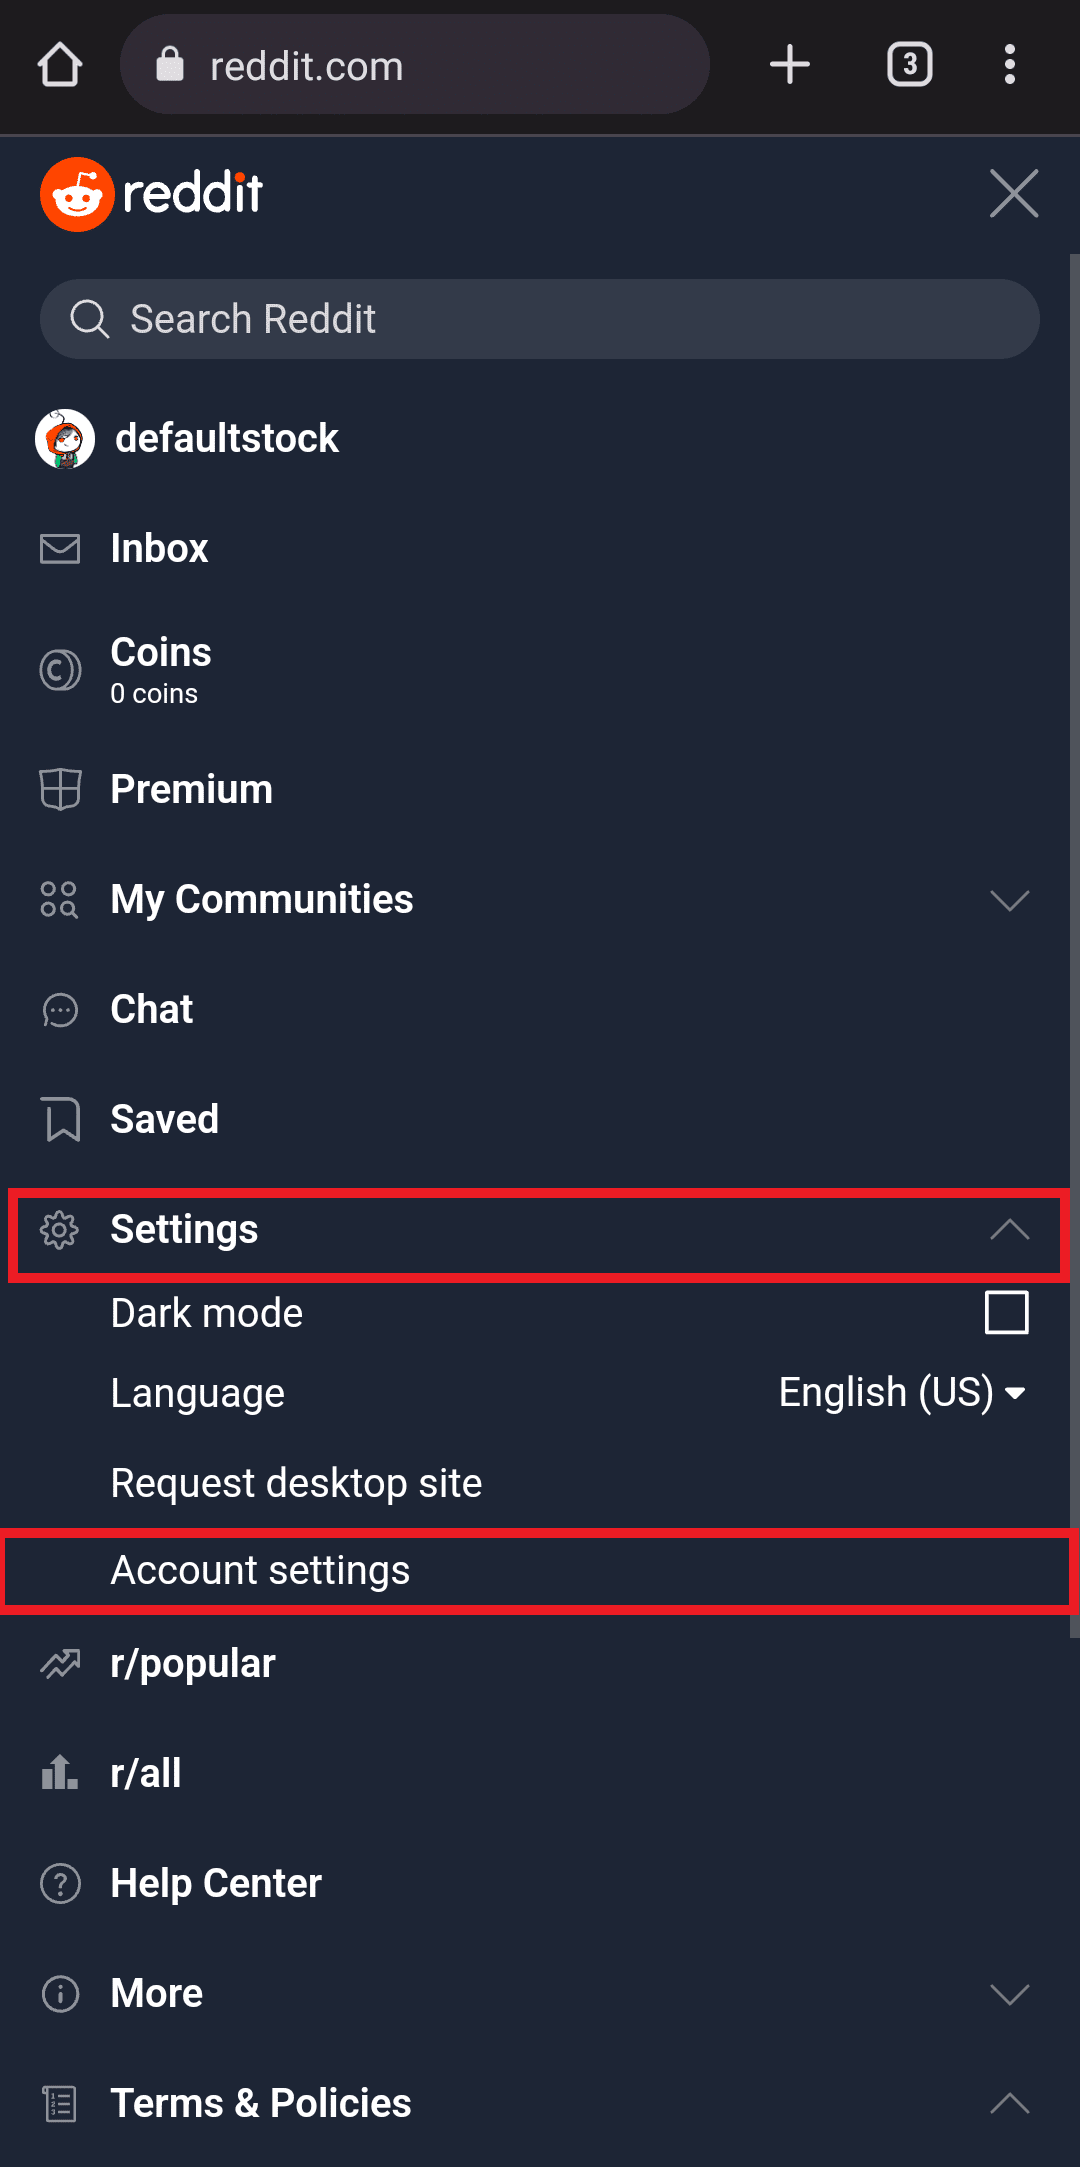 tap on settings and choose account settings